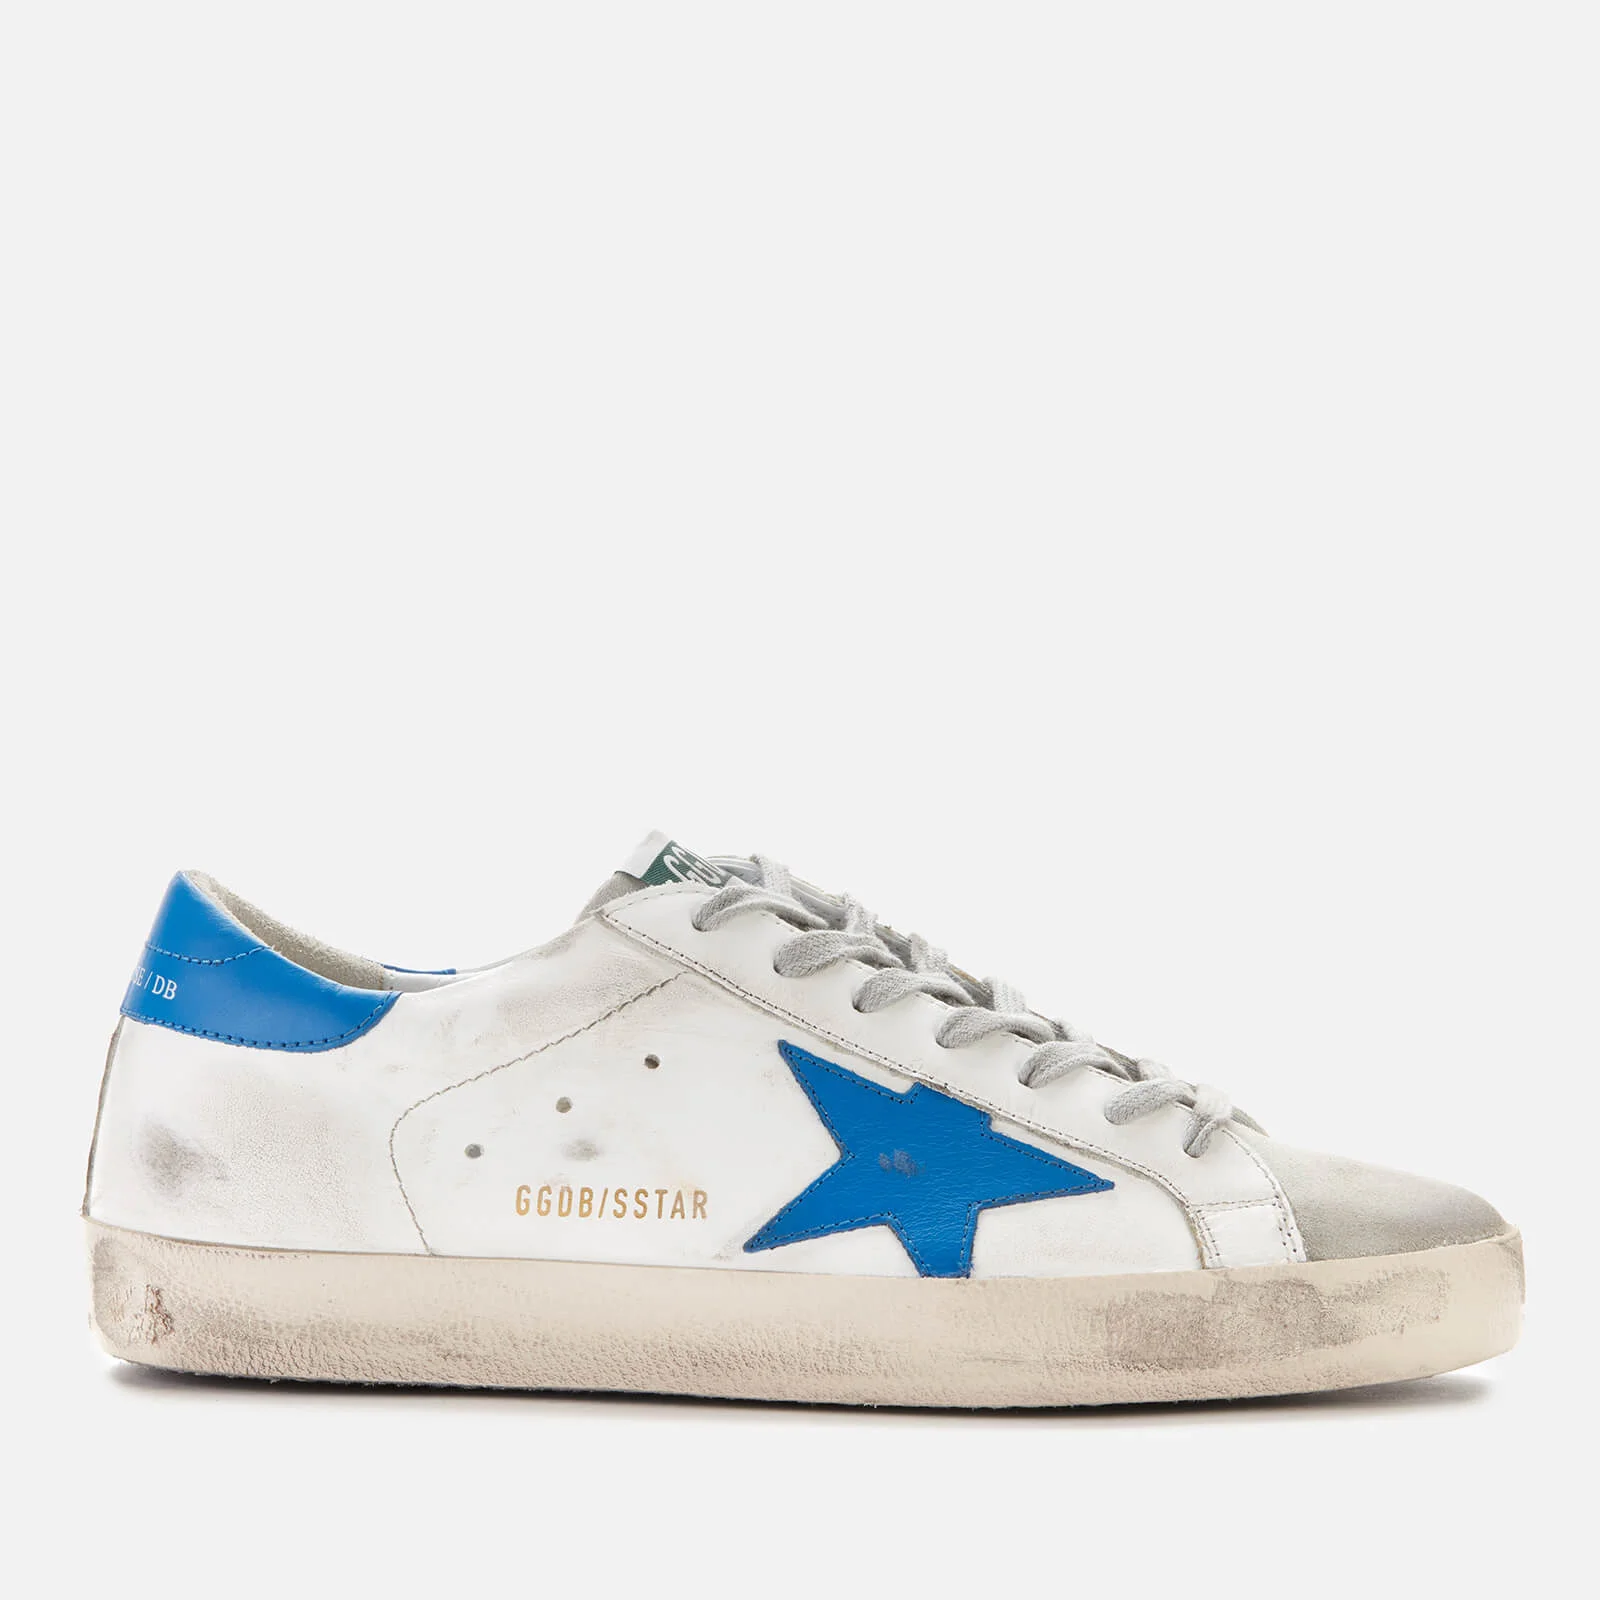 Golden Goose Men's Superstar Leather Trainers - White/Ice Blue Star Image 1